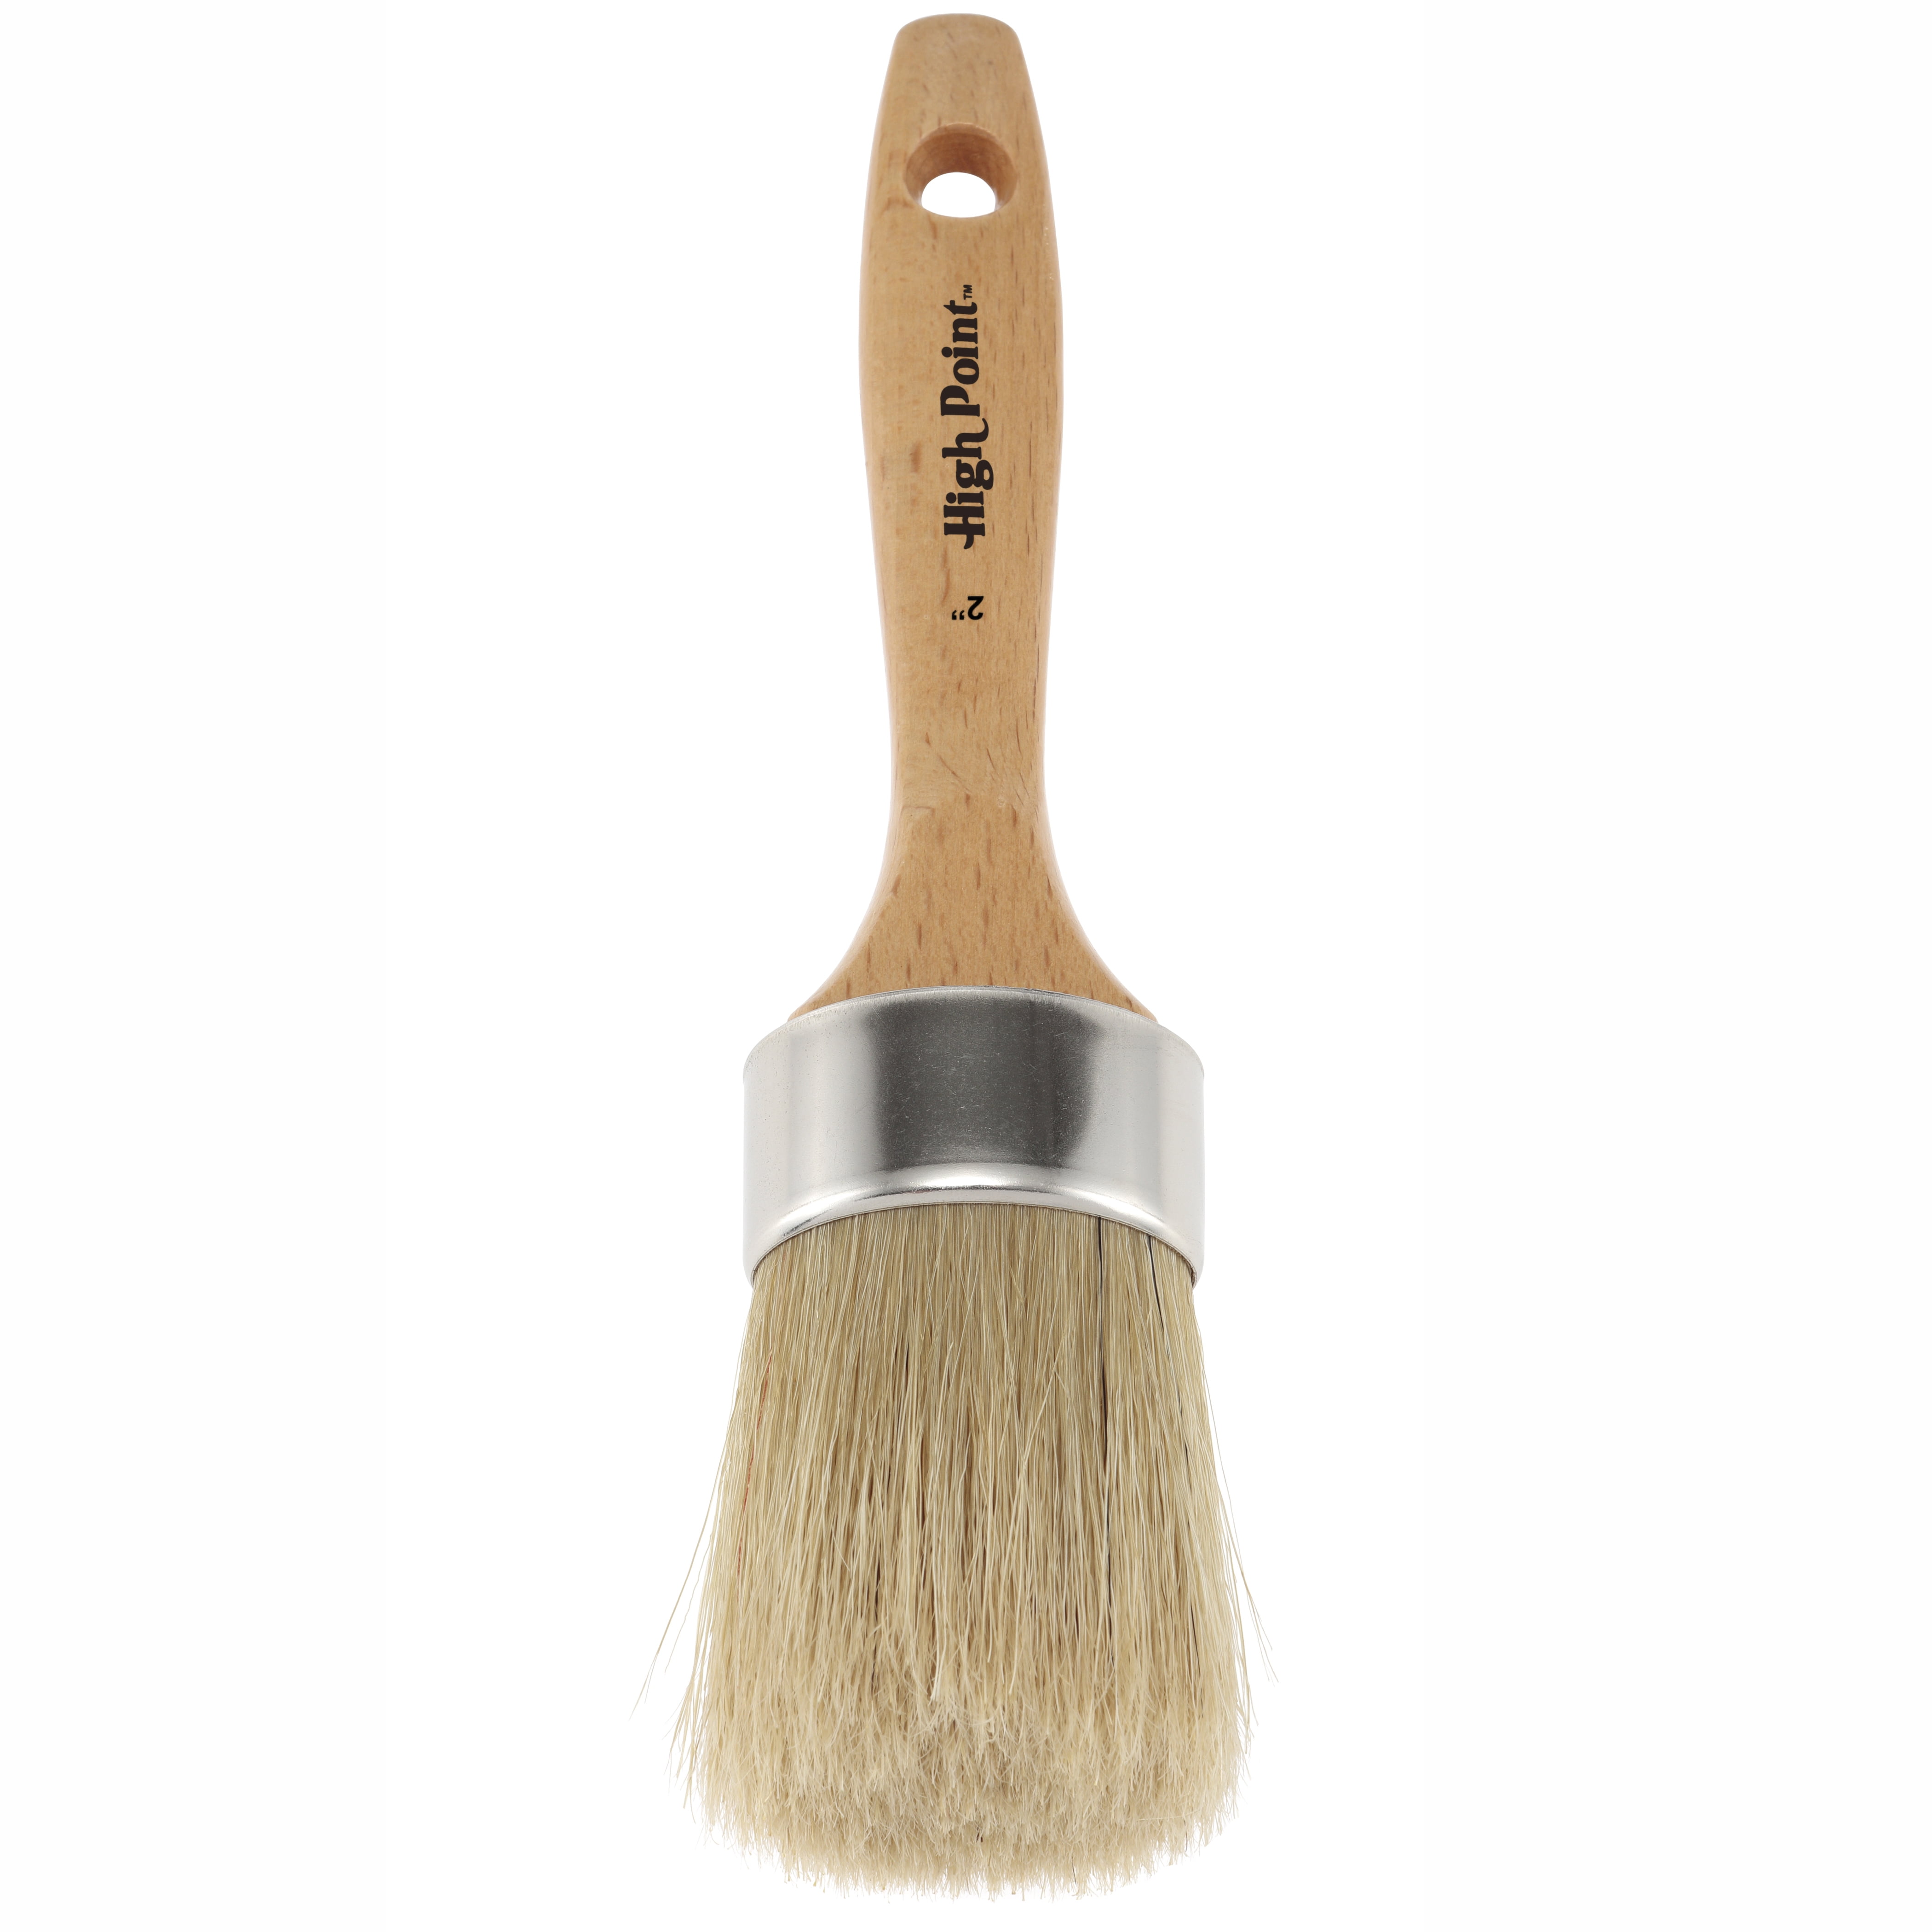 Chalk Furniture Paint Brushesw Natural Boar Bristles 1st Brush a Large Wax Brush or Wall Stencil Brush 2nd Brush a Medium Size Paint Brush